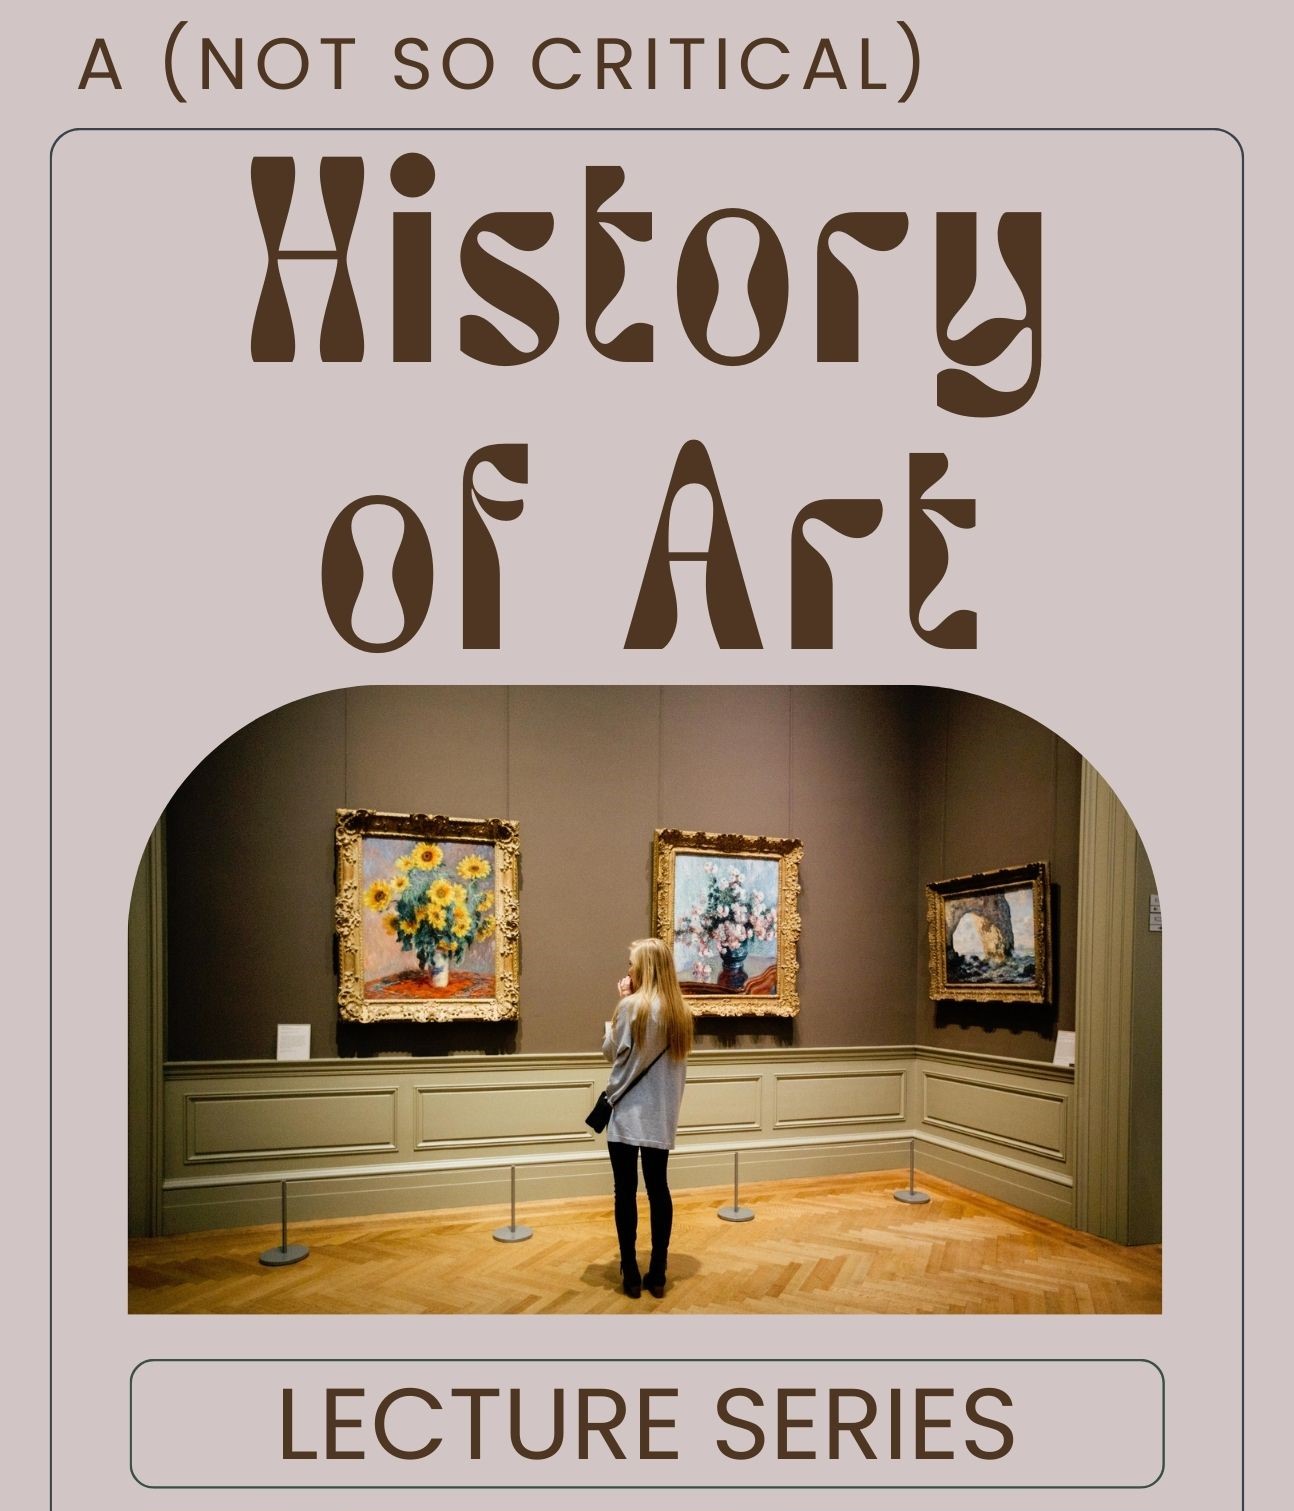 A (not so critical) History of art lecture series poster with image of a woman looking at paintings in an art museum